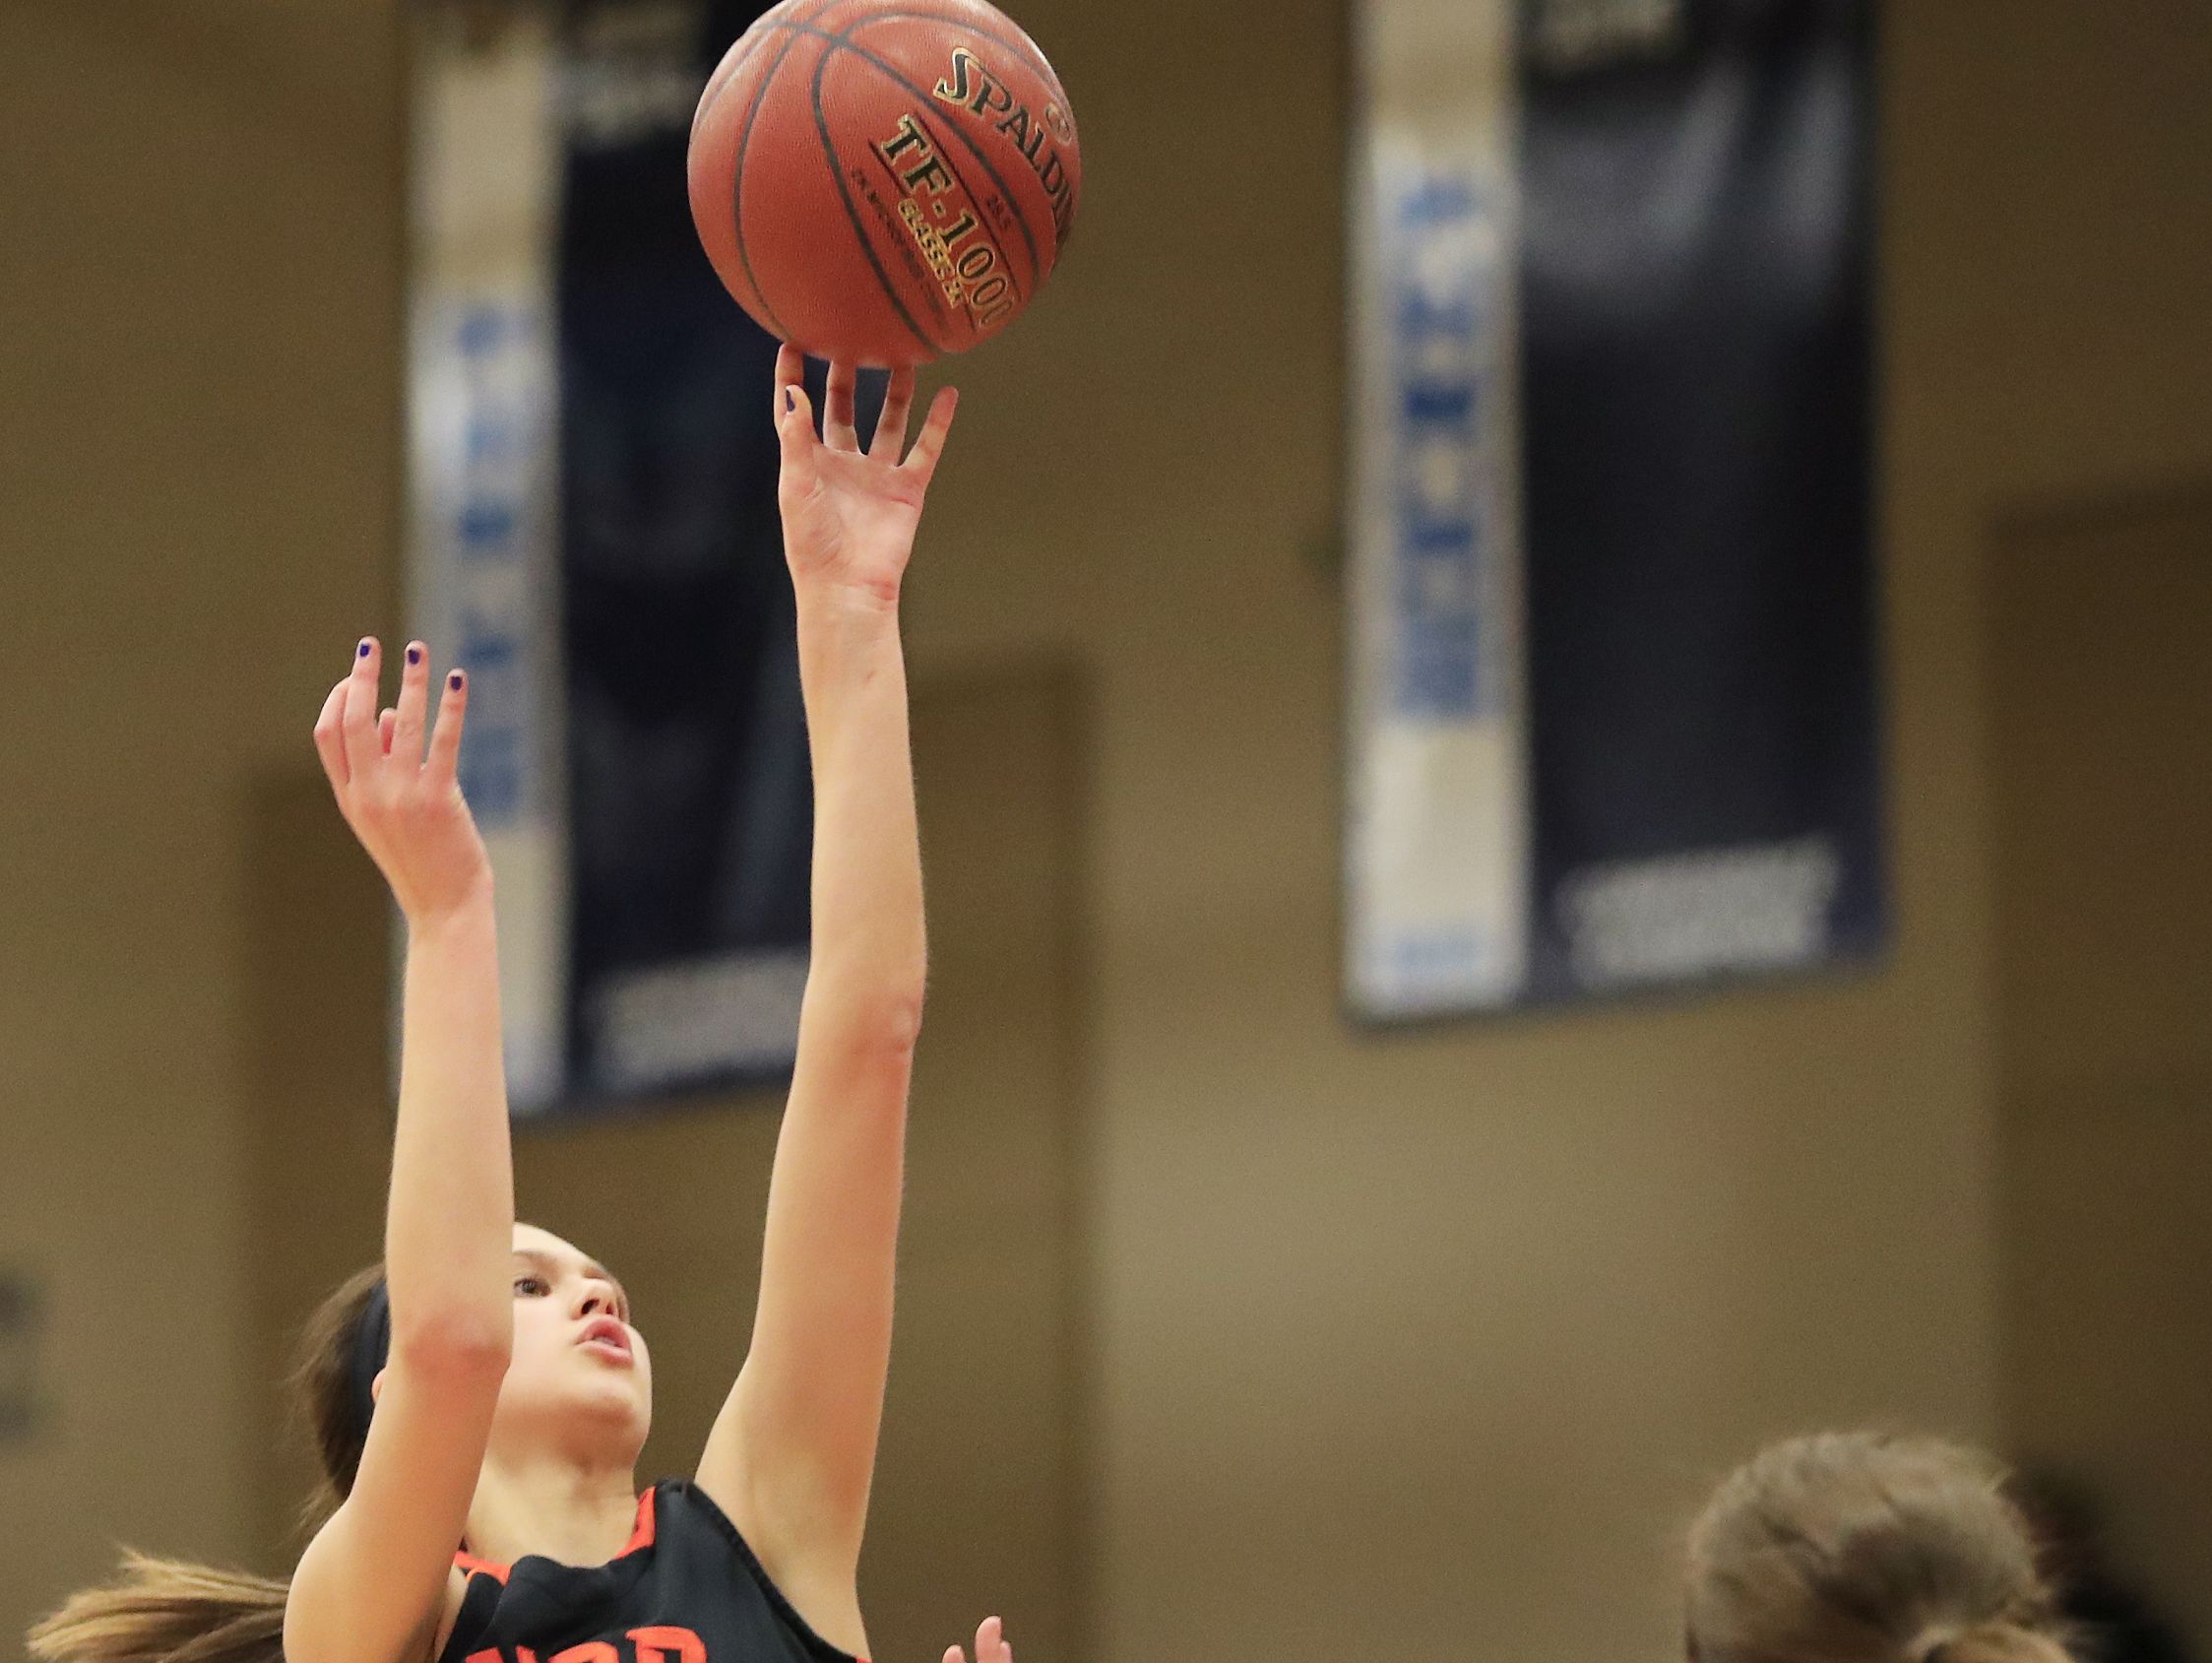 West De Pere's Sam Carriveau (2) shoots over Bay Port defenders during a nonconference girls basketball game Friday in Suamico. The Phantoms picked up the win to improve to 9-0 this season.